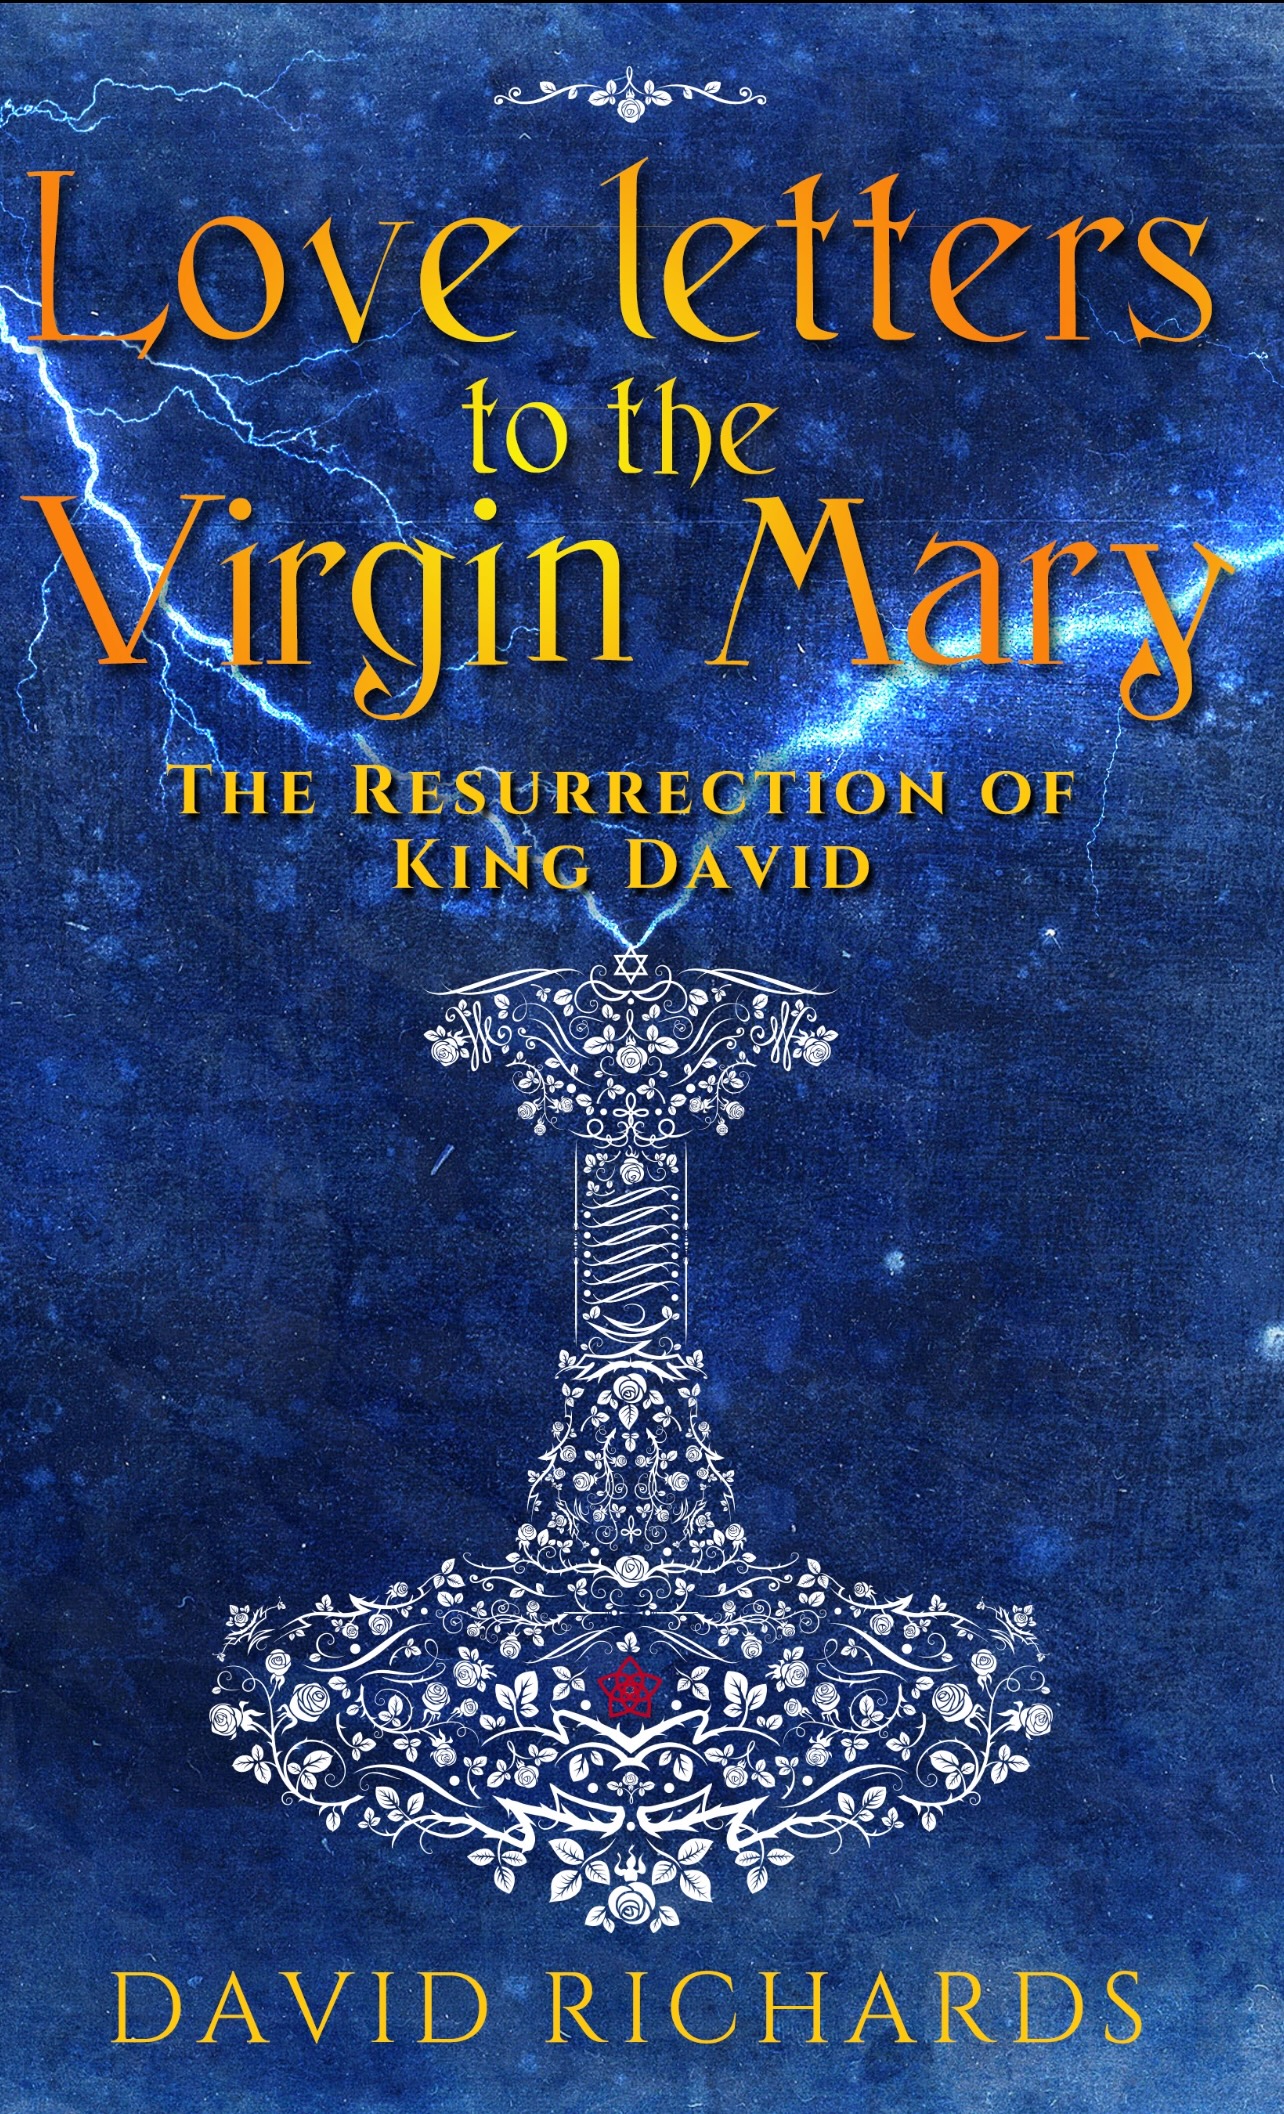 Love Letters to the Virgin Mary  by David Richards